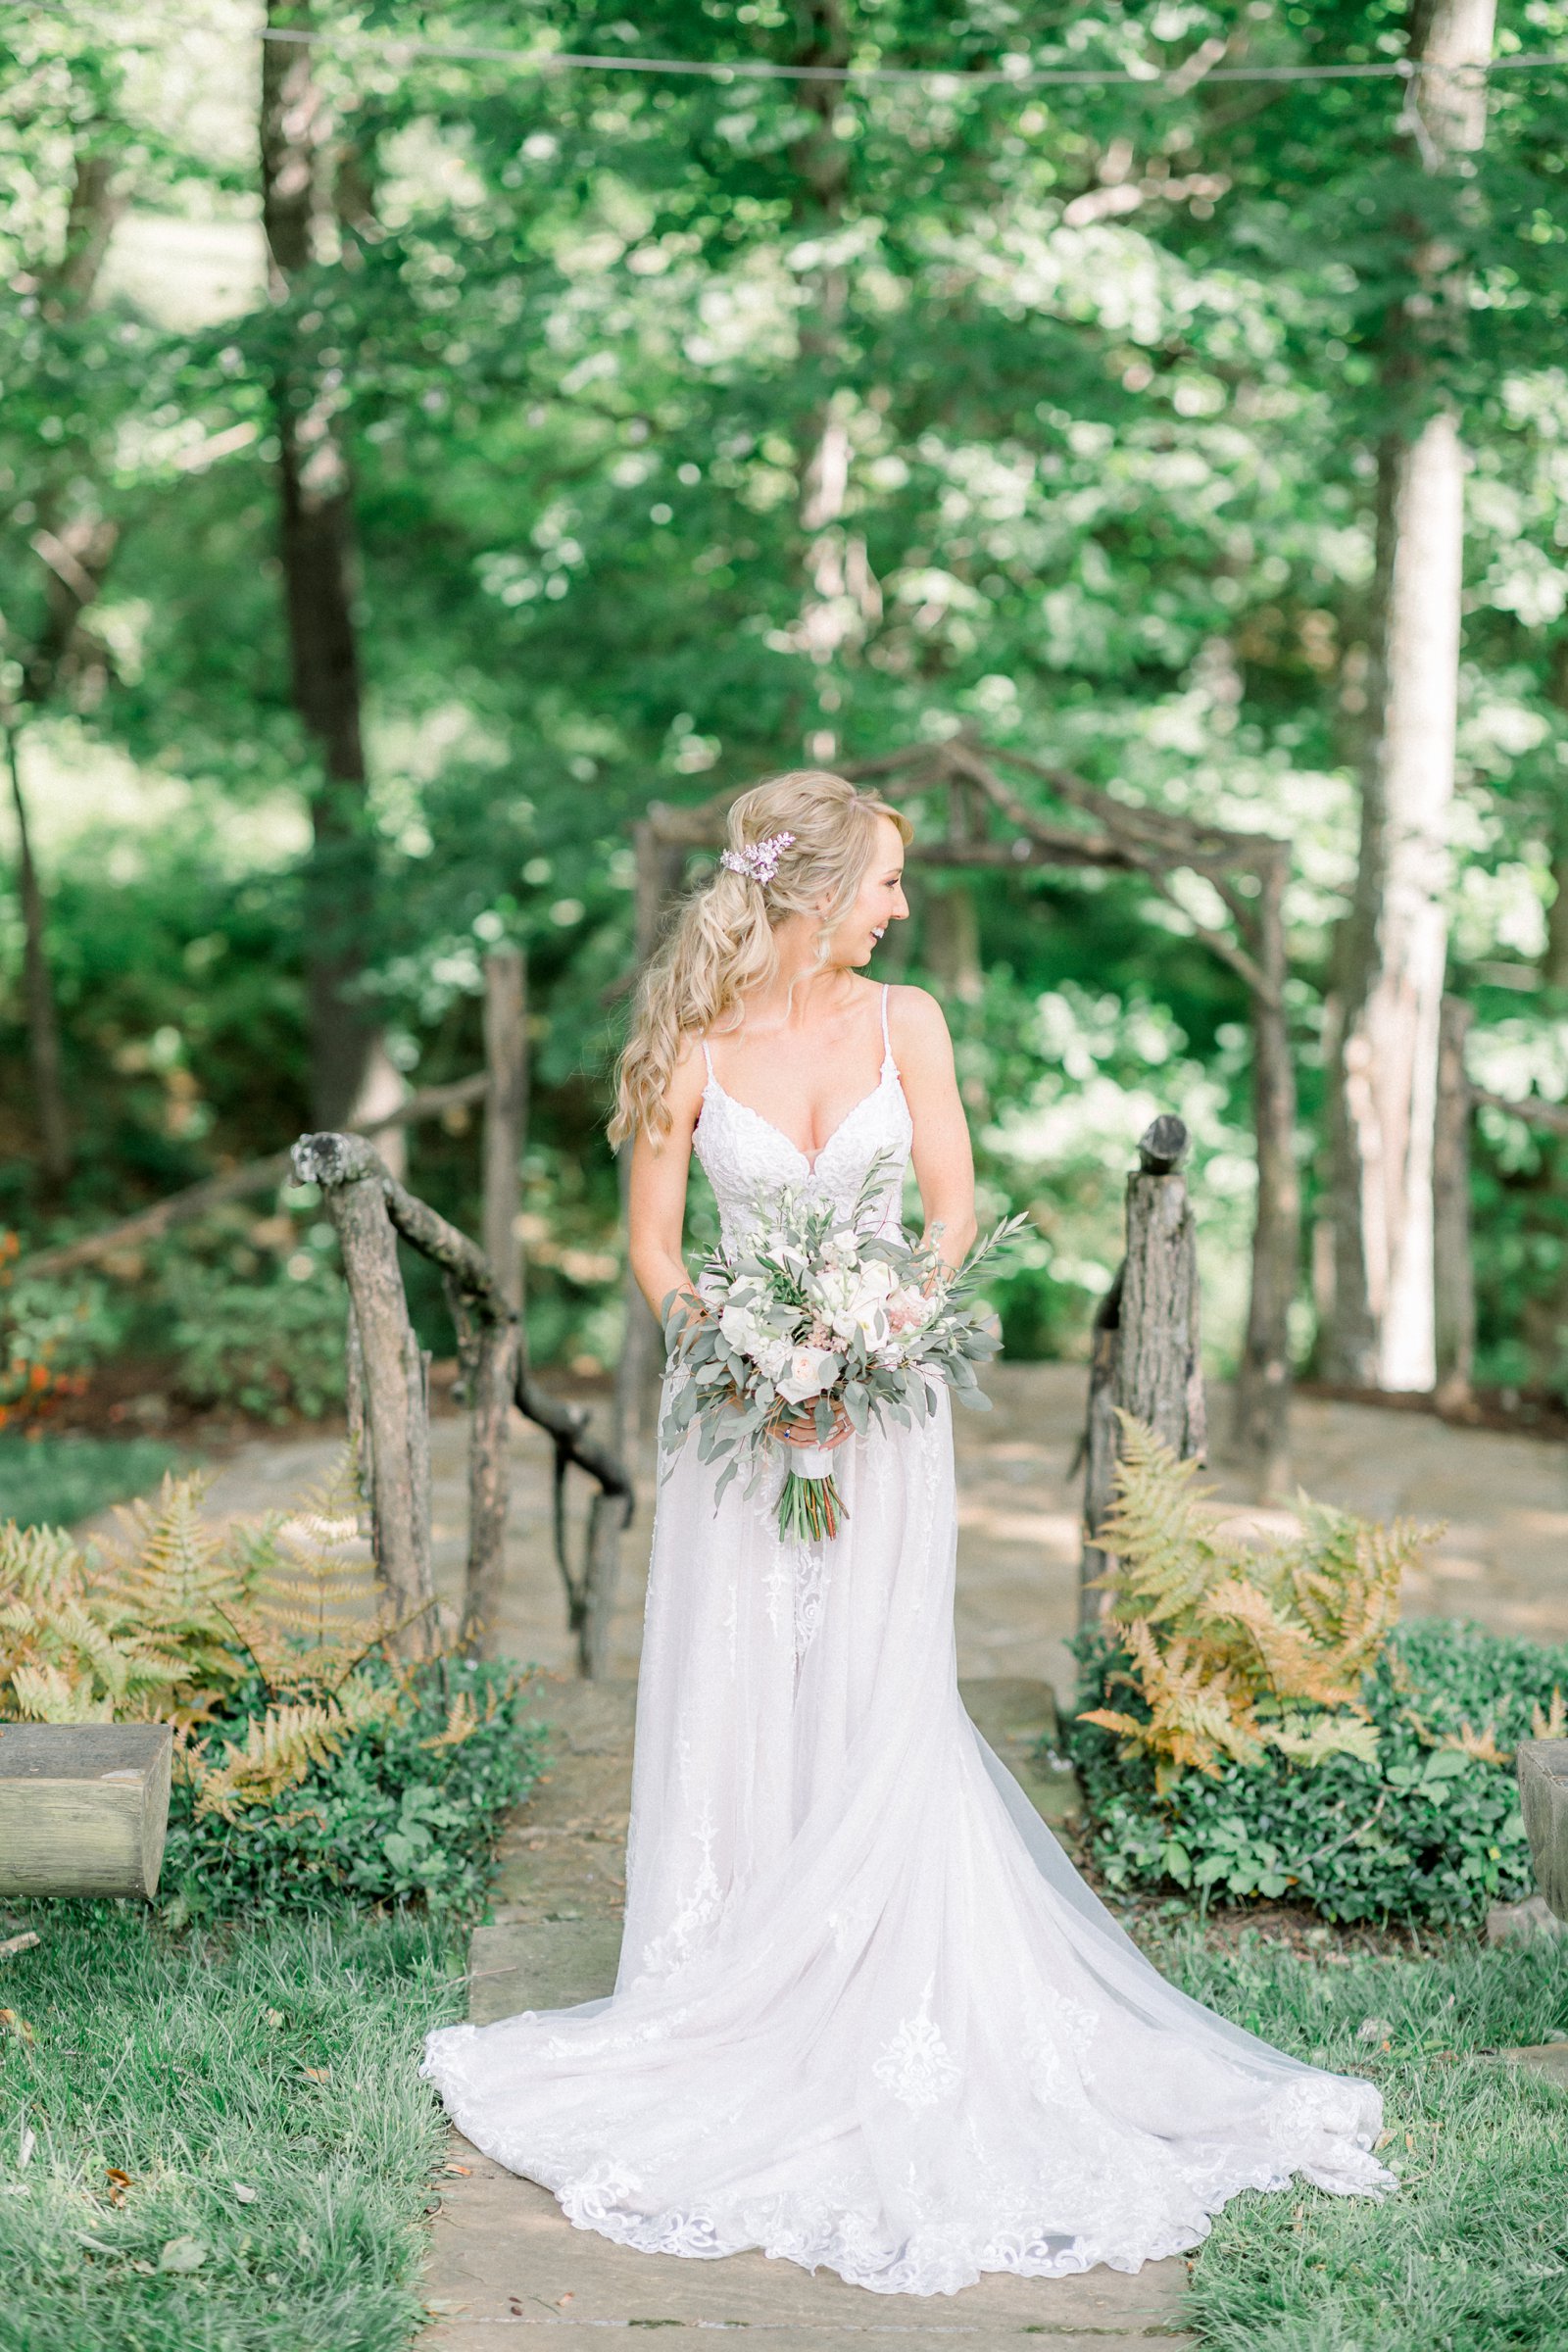 3 People You Should Consider to Be Your Chattanooga Wedding Videographer by alyssa rachelle photography